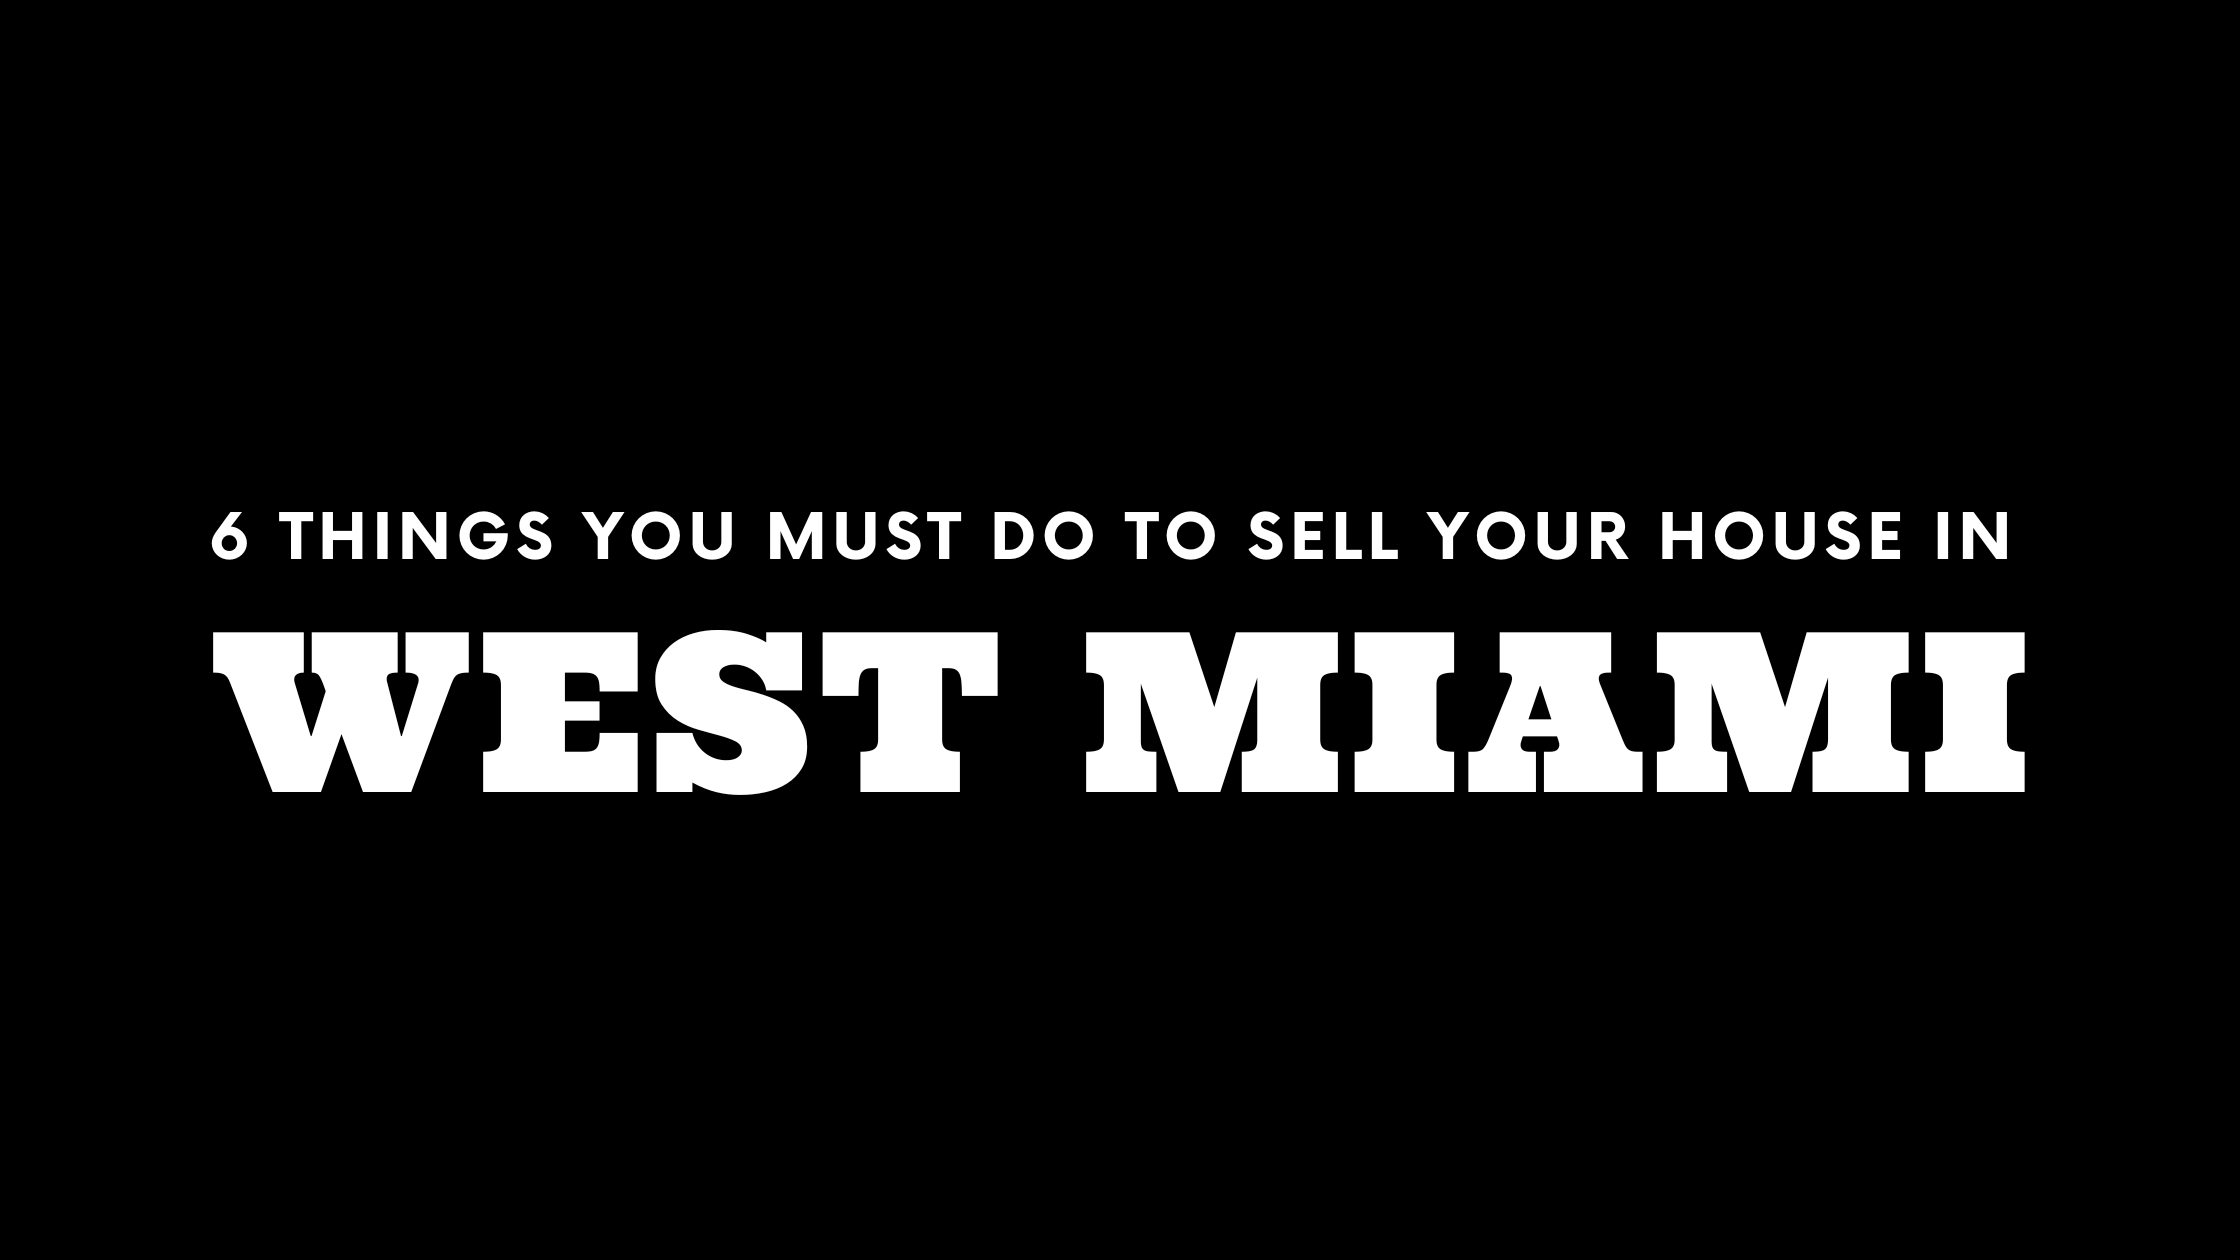 Selling Your House in West Miami? 6 Things You MUST Do!